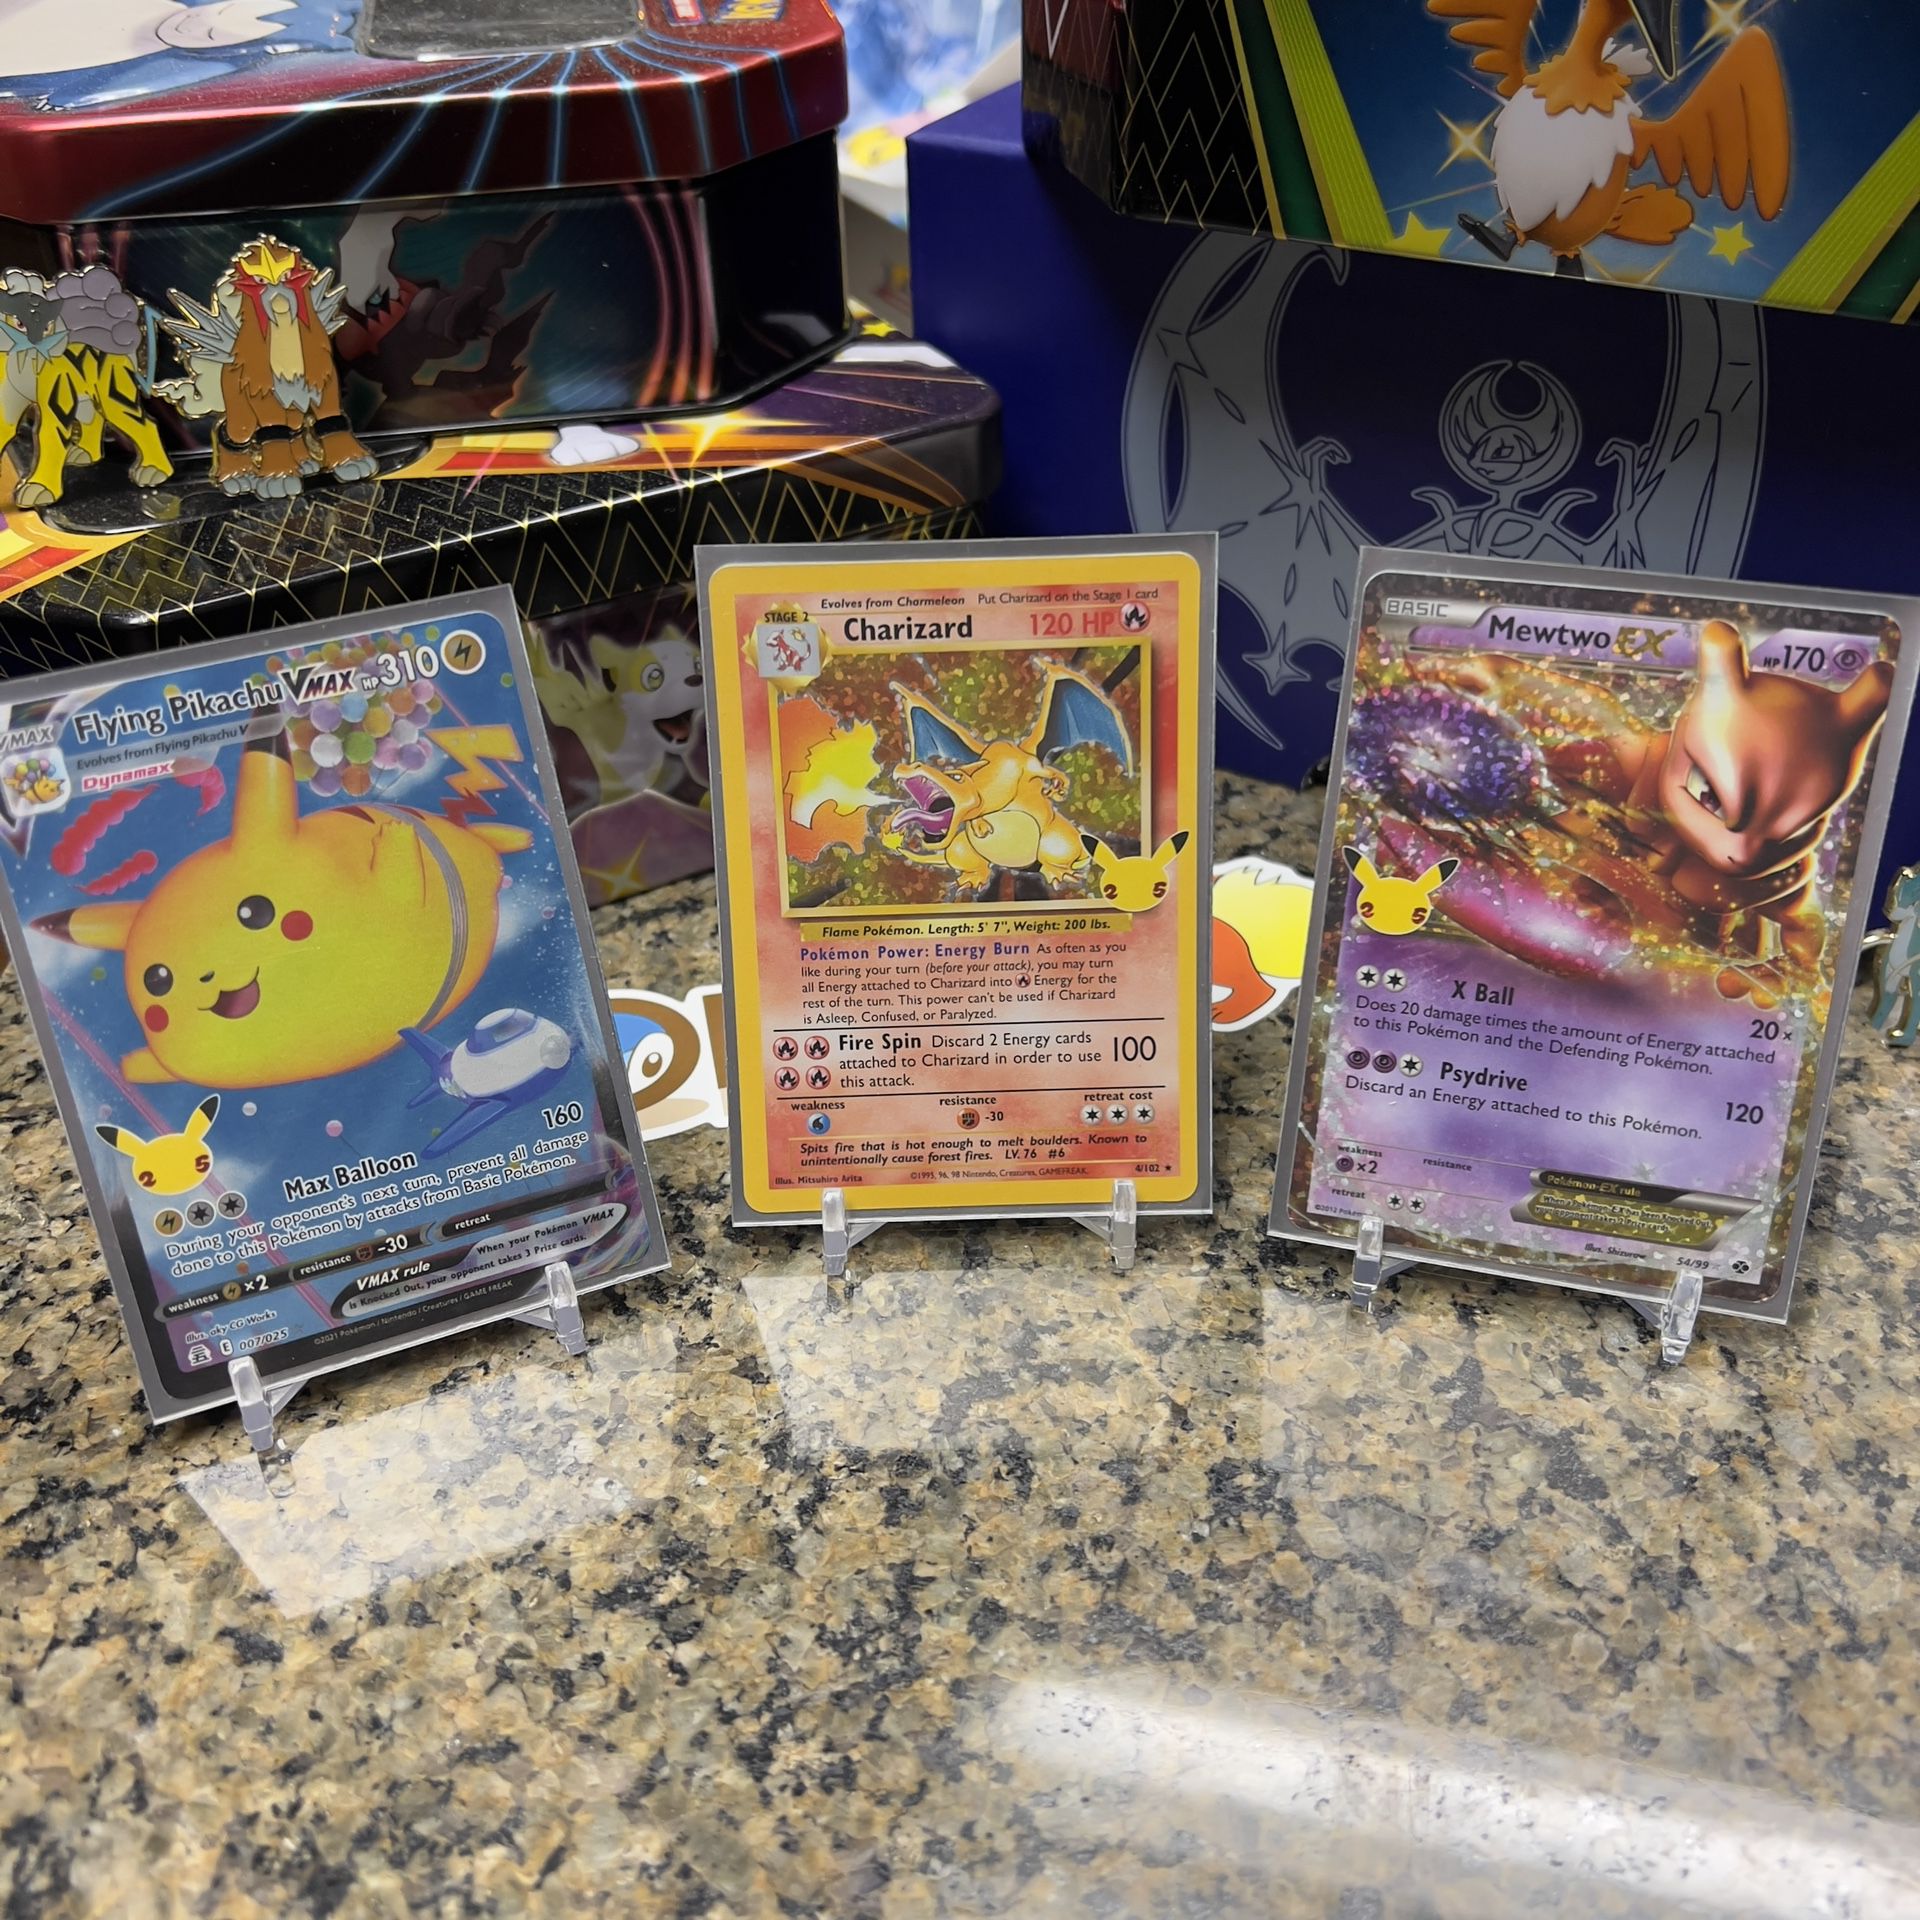 CELEBRATIONS Mewtwo And Flying Pikachu Vmax! Pack Fresh! Charizard Is Sold